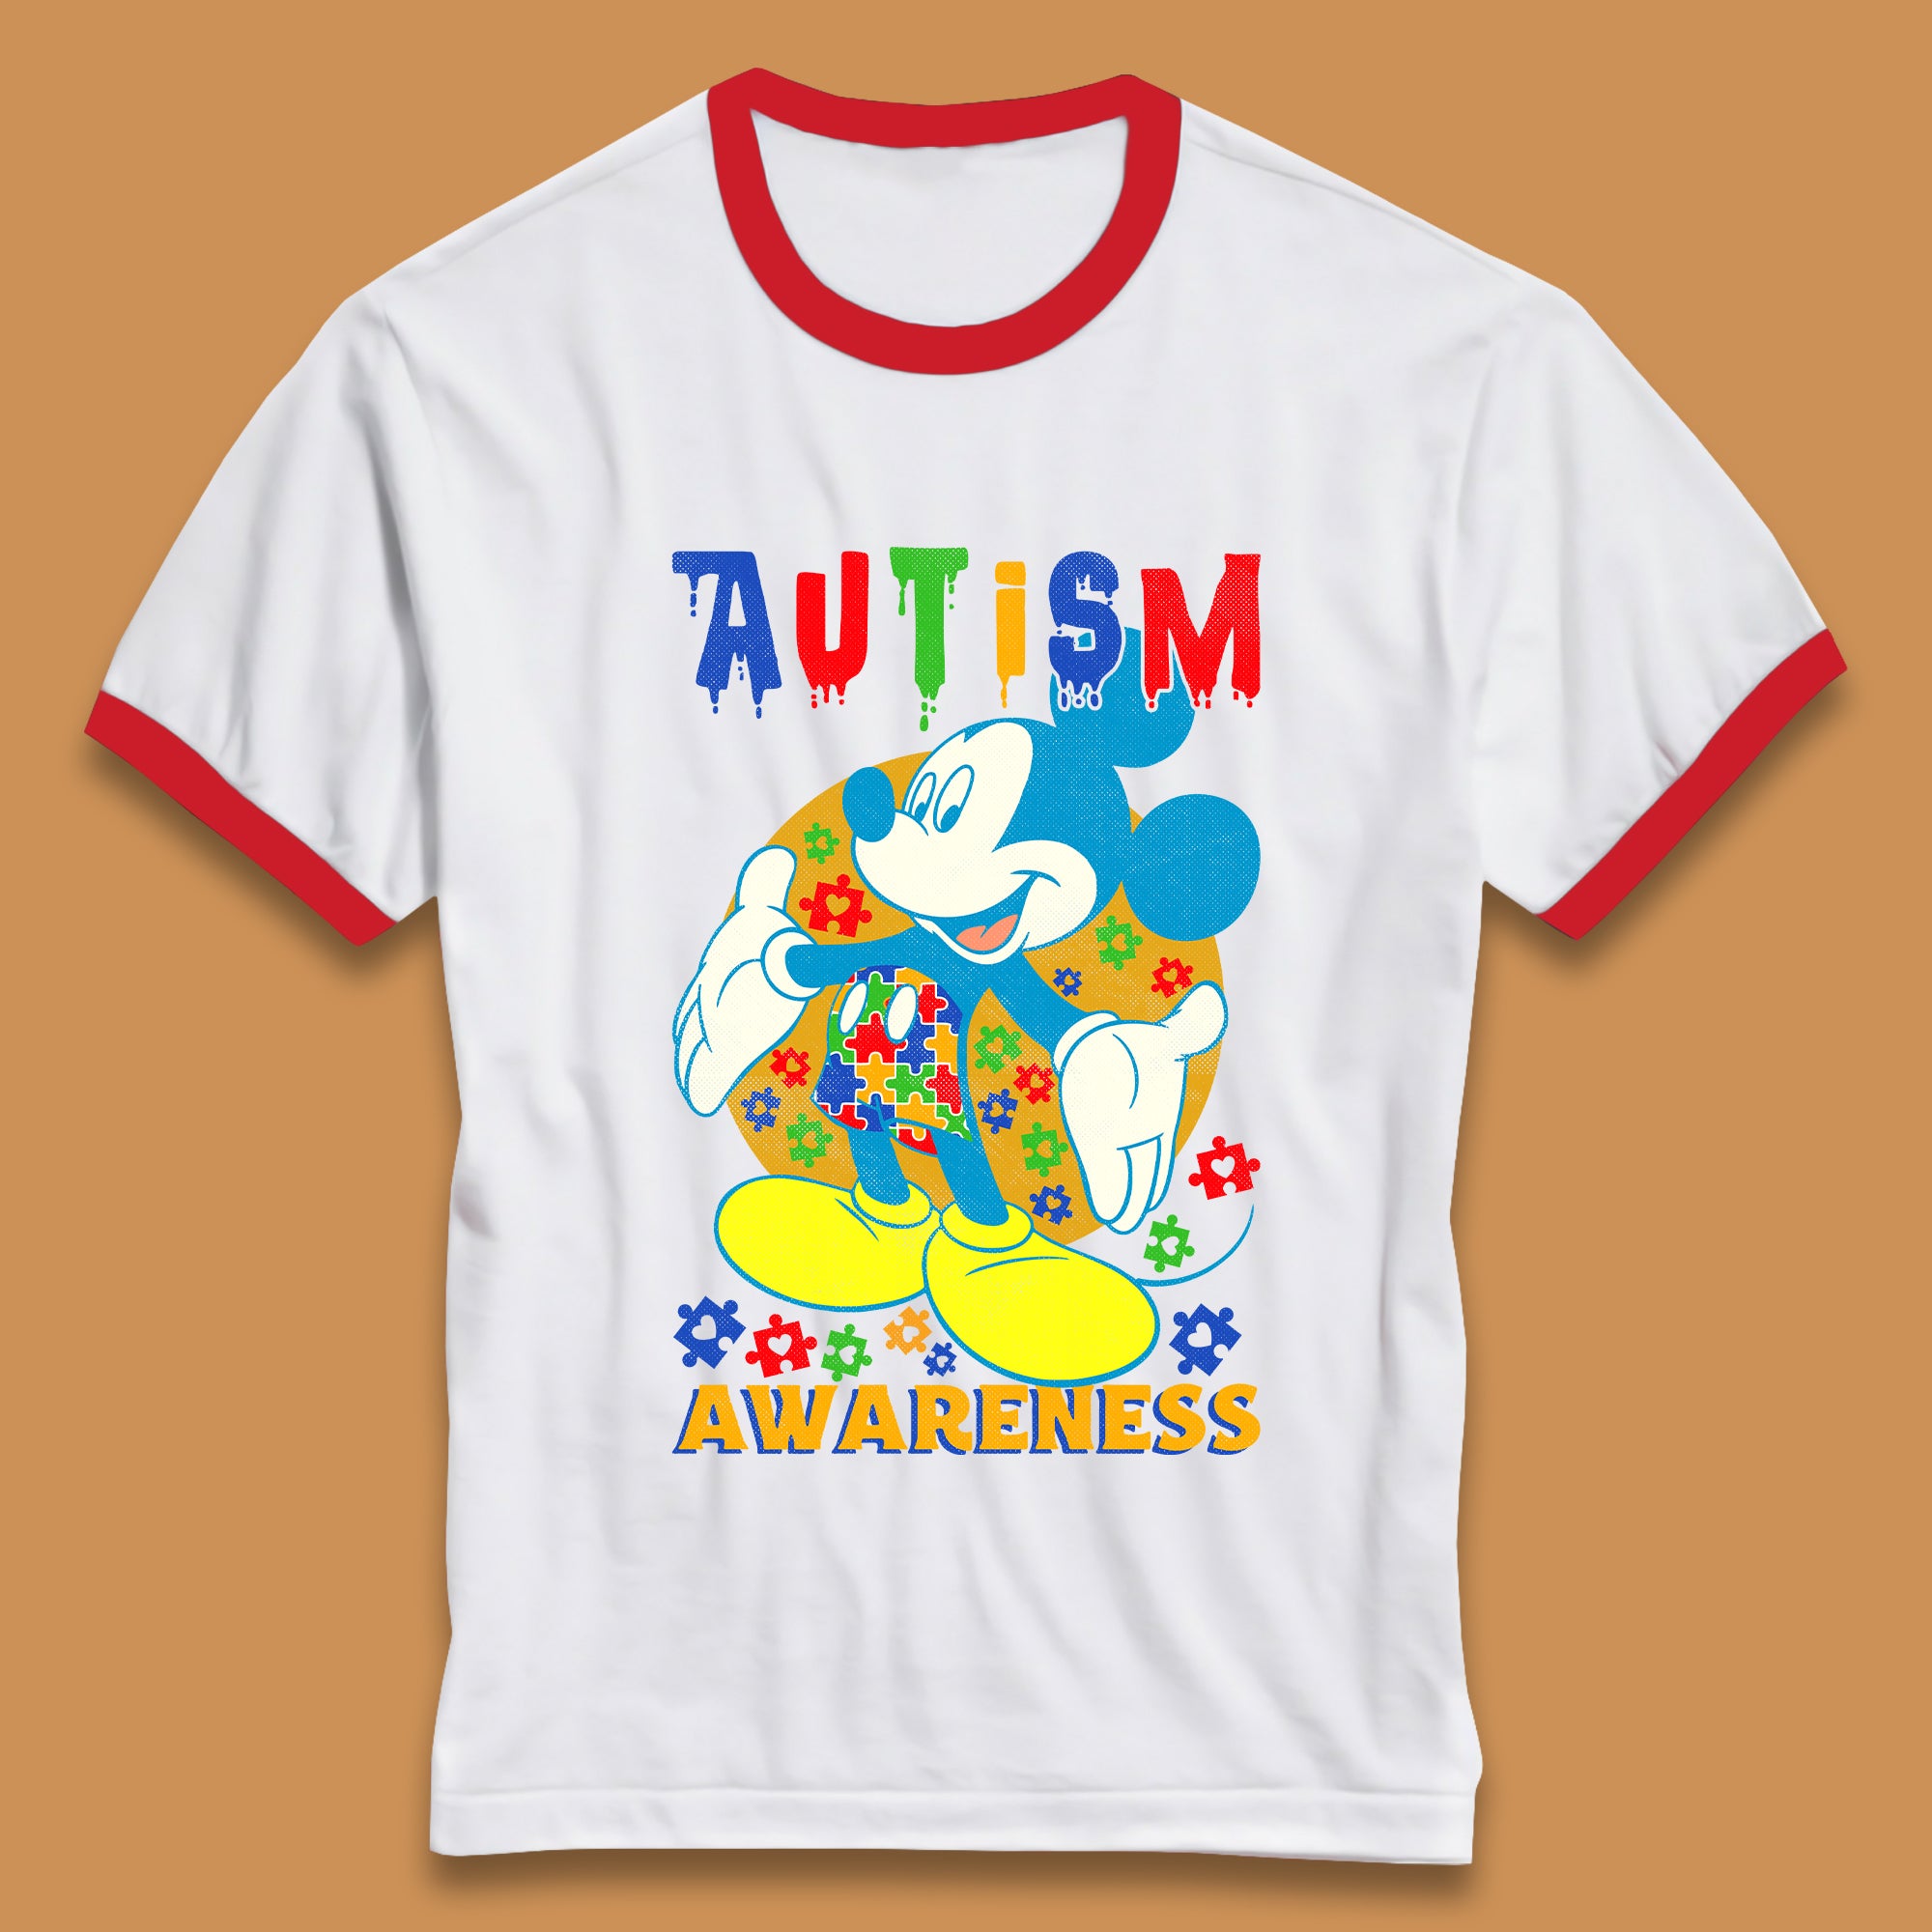 Autism Awareness Mickey Mouse Ringer T-Shirt